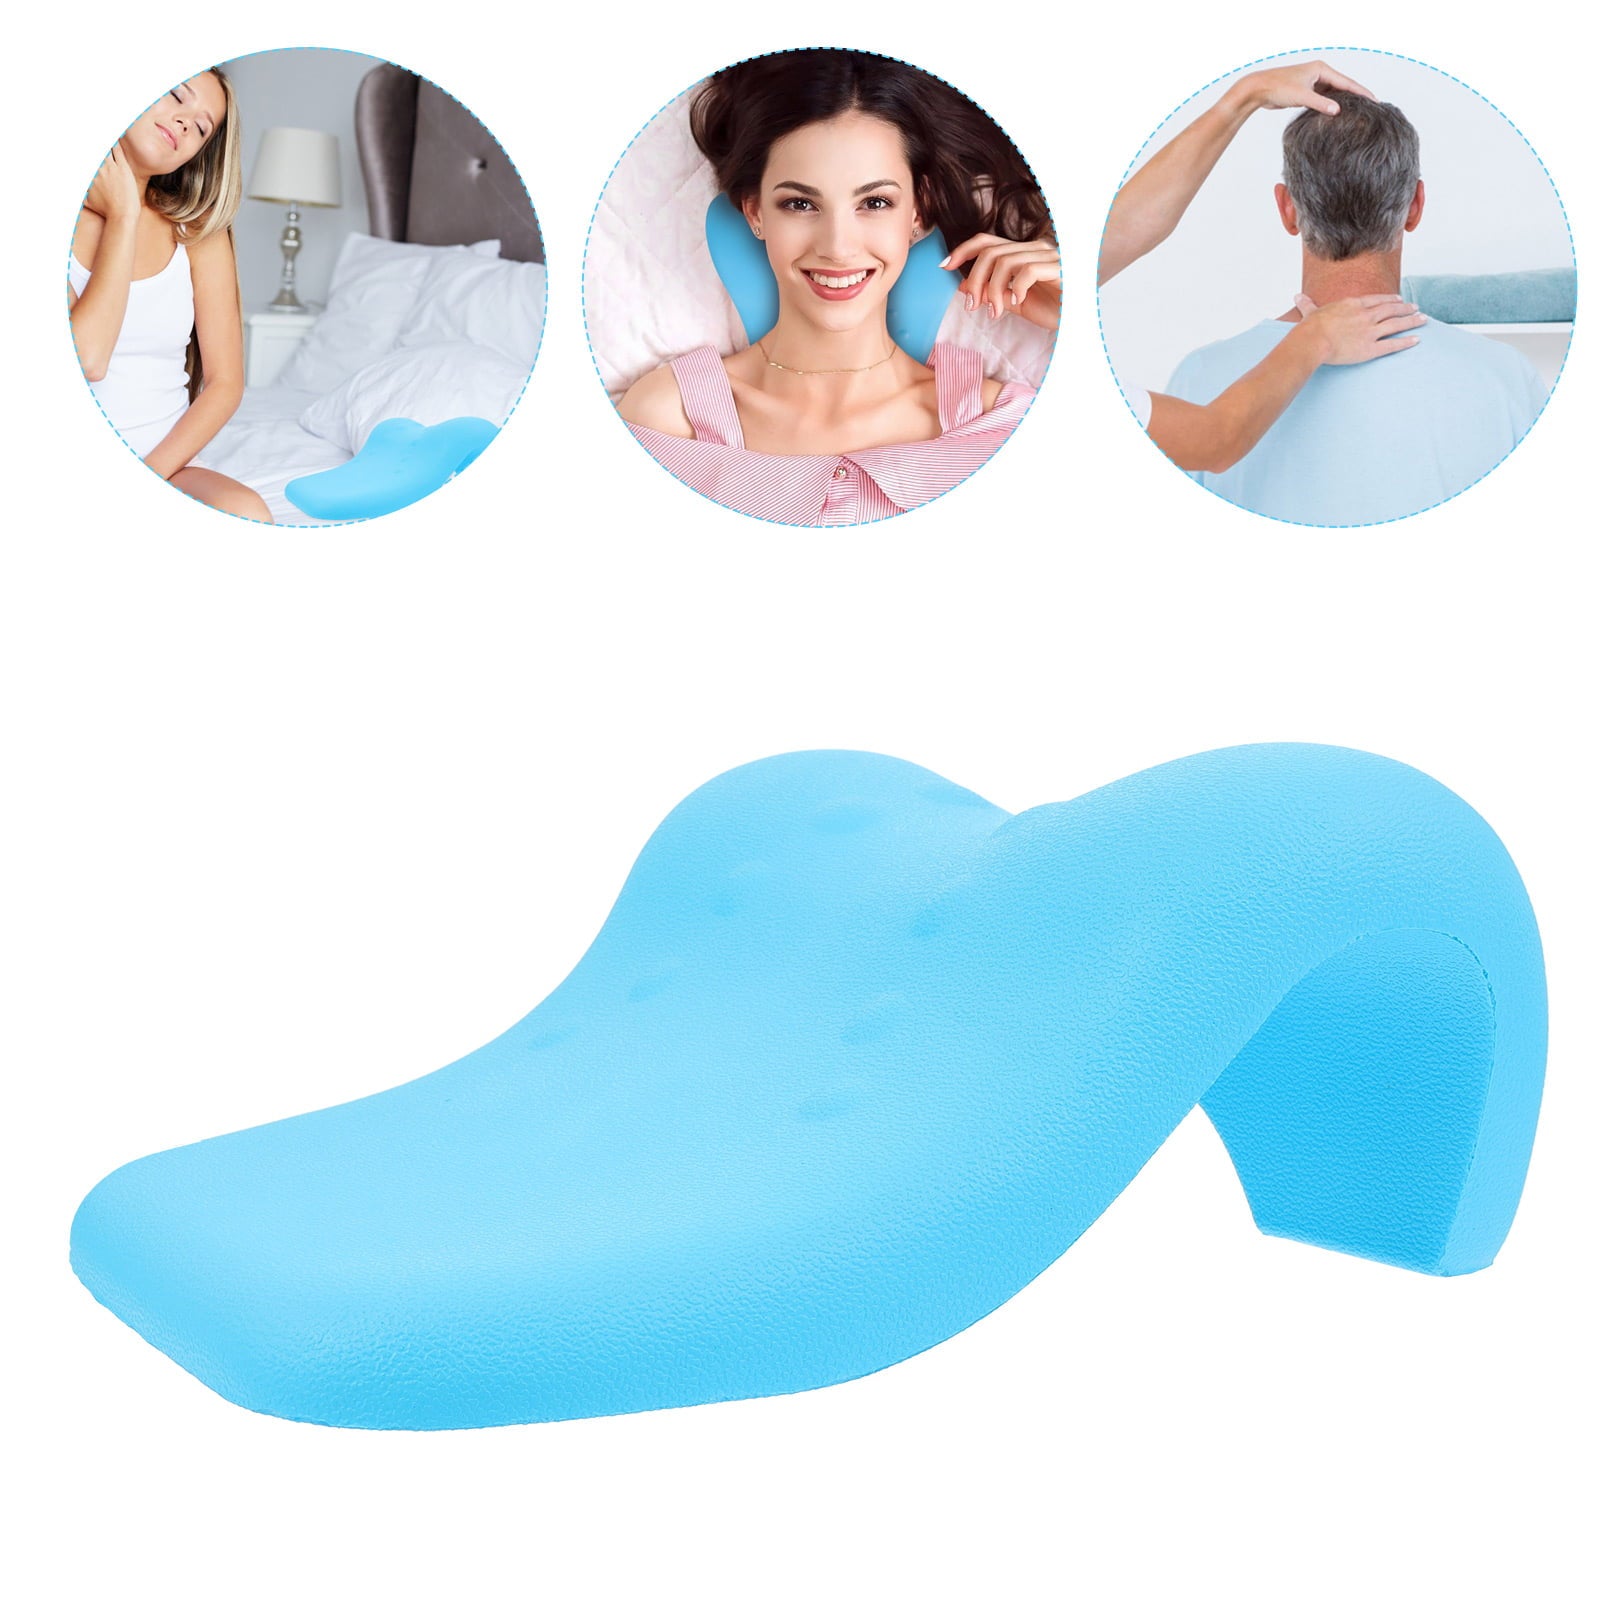 Pillow Neck Cervical Traction Device Massage Sleeping Bed Cushion Support Decompression Stretcher Alignment